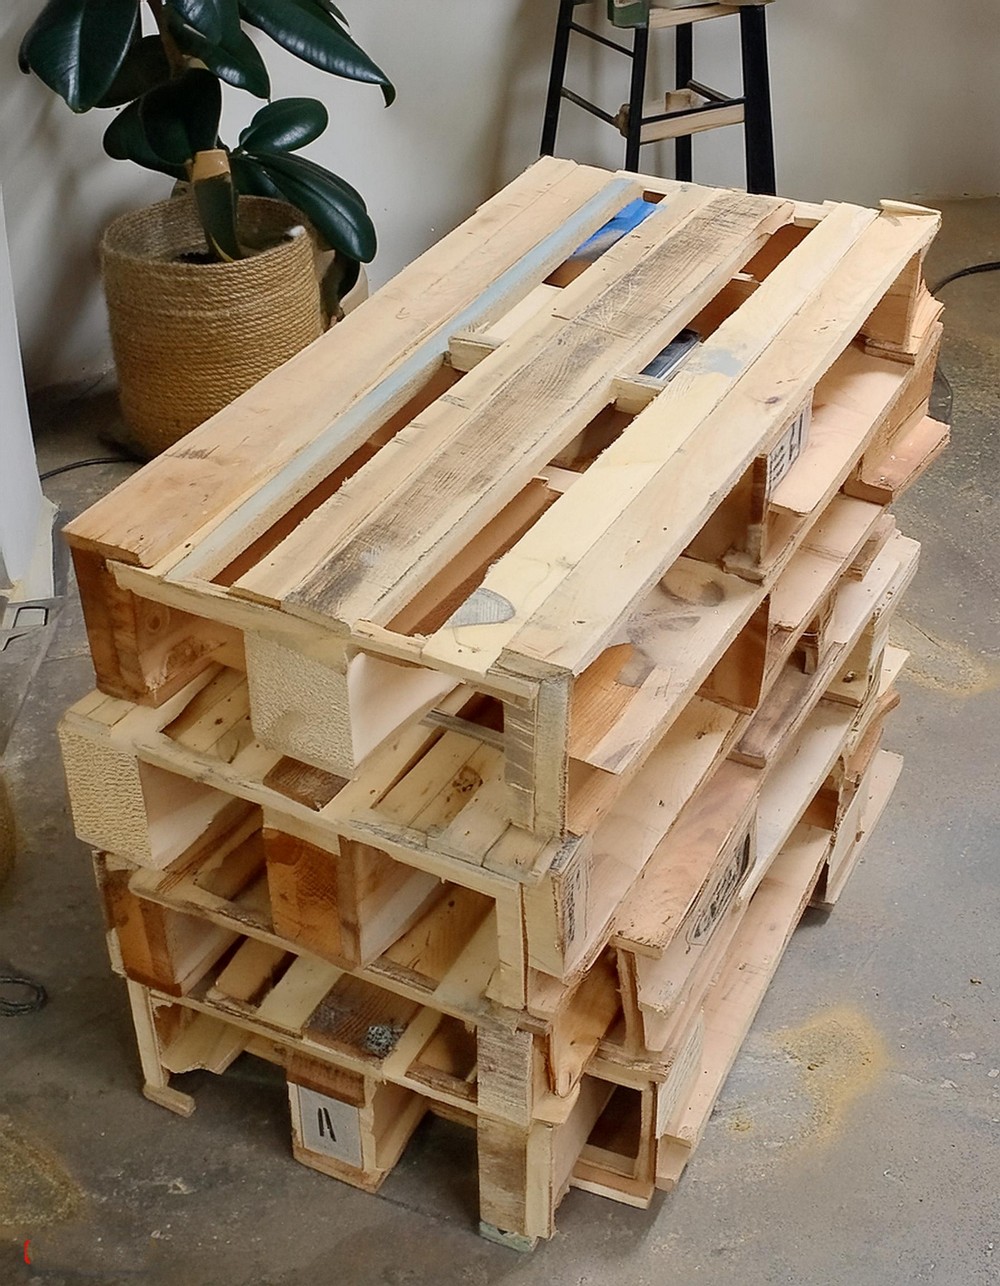 Firefly DIY Pallet Wood Bench Project 53012 (1)